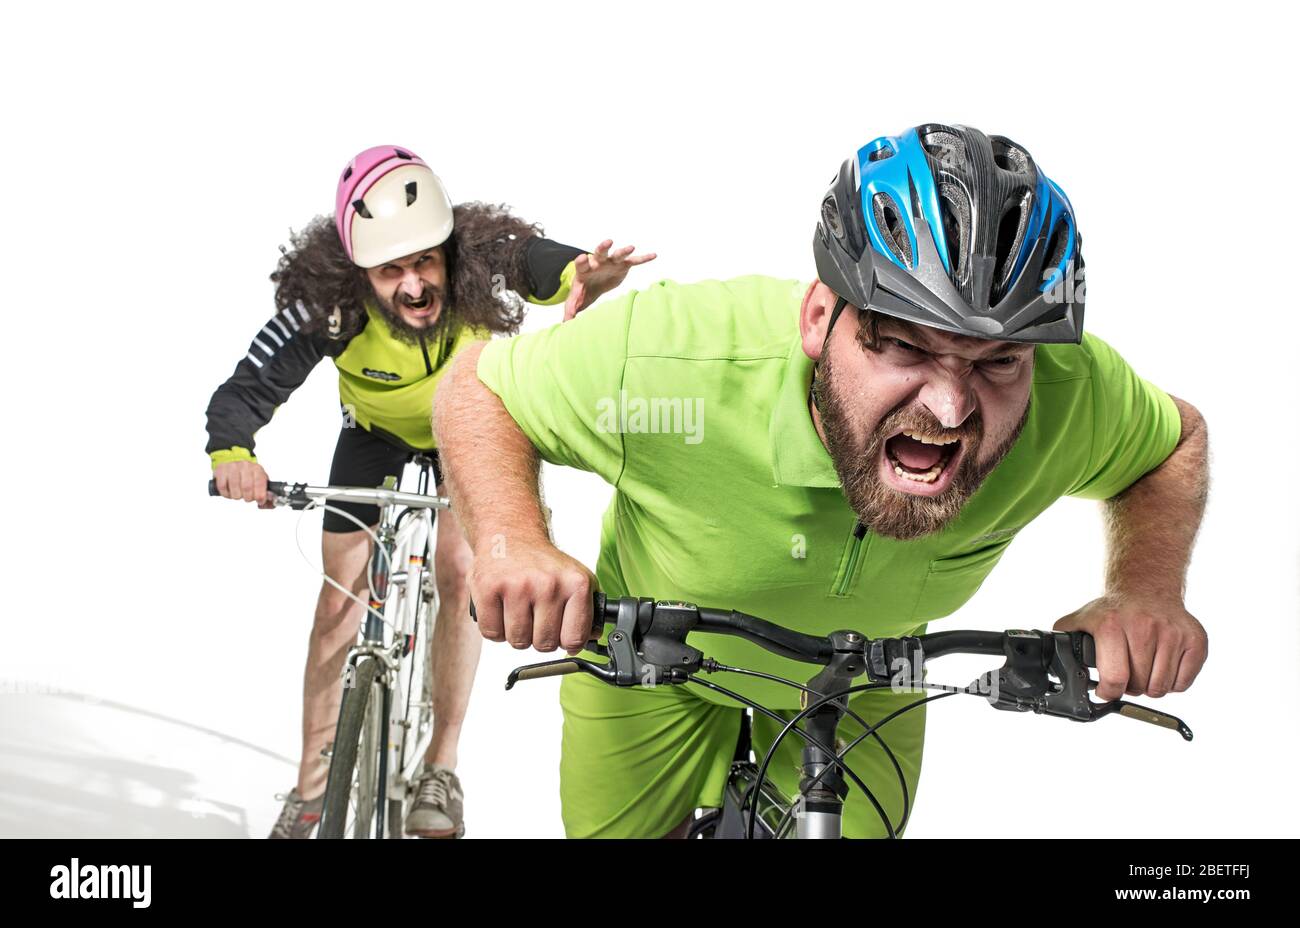 Plump and skinny geeks riding bicycles Stock Photo